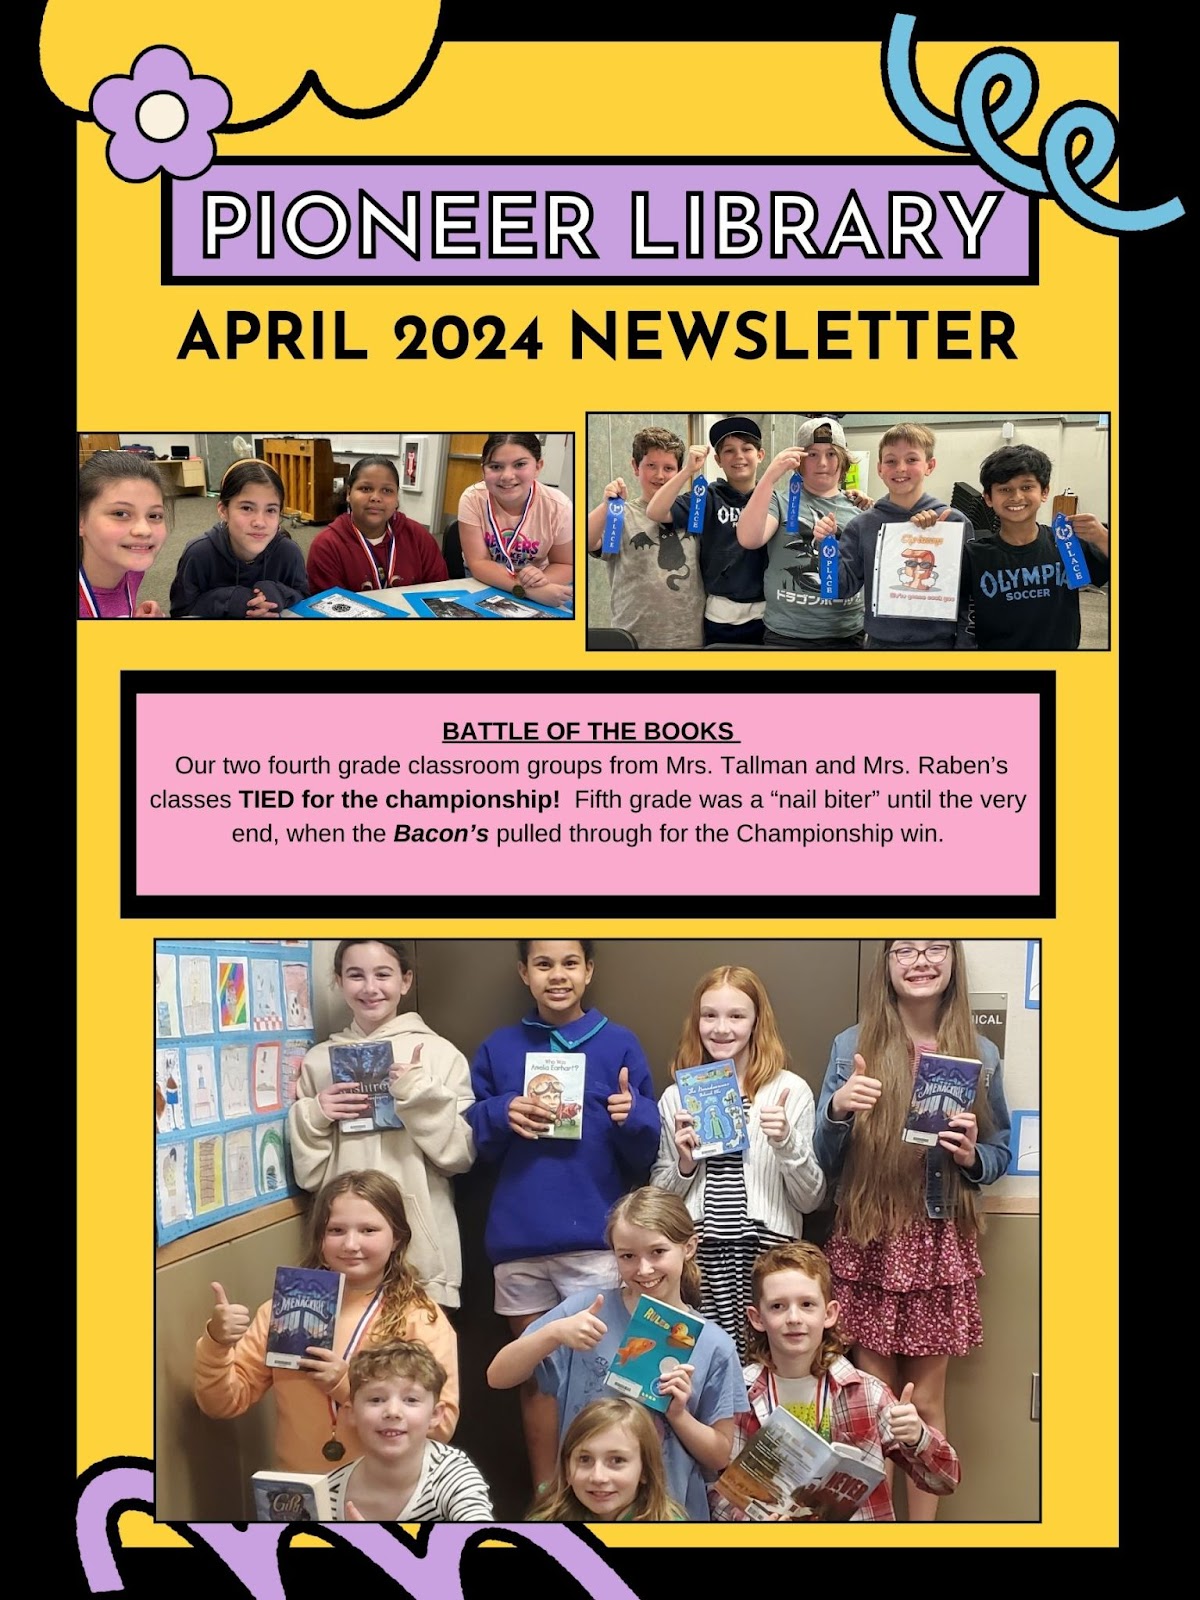 News from our Librarian showing photos and news from the Battle of the Books. It was an exciting competition. Our 4th grade teams tied for the championship. Our 5th grade teams were close until the very end when team Bacon pulled thru to claim the win!